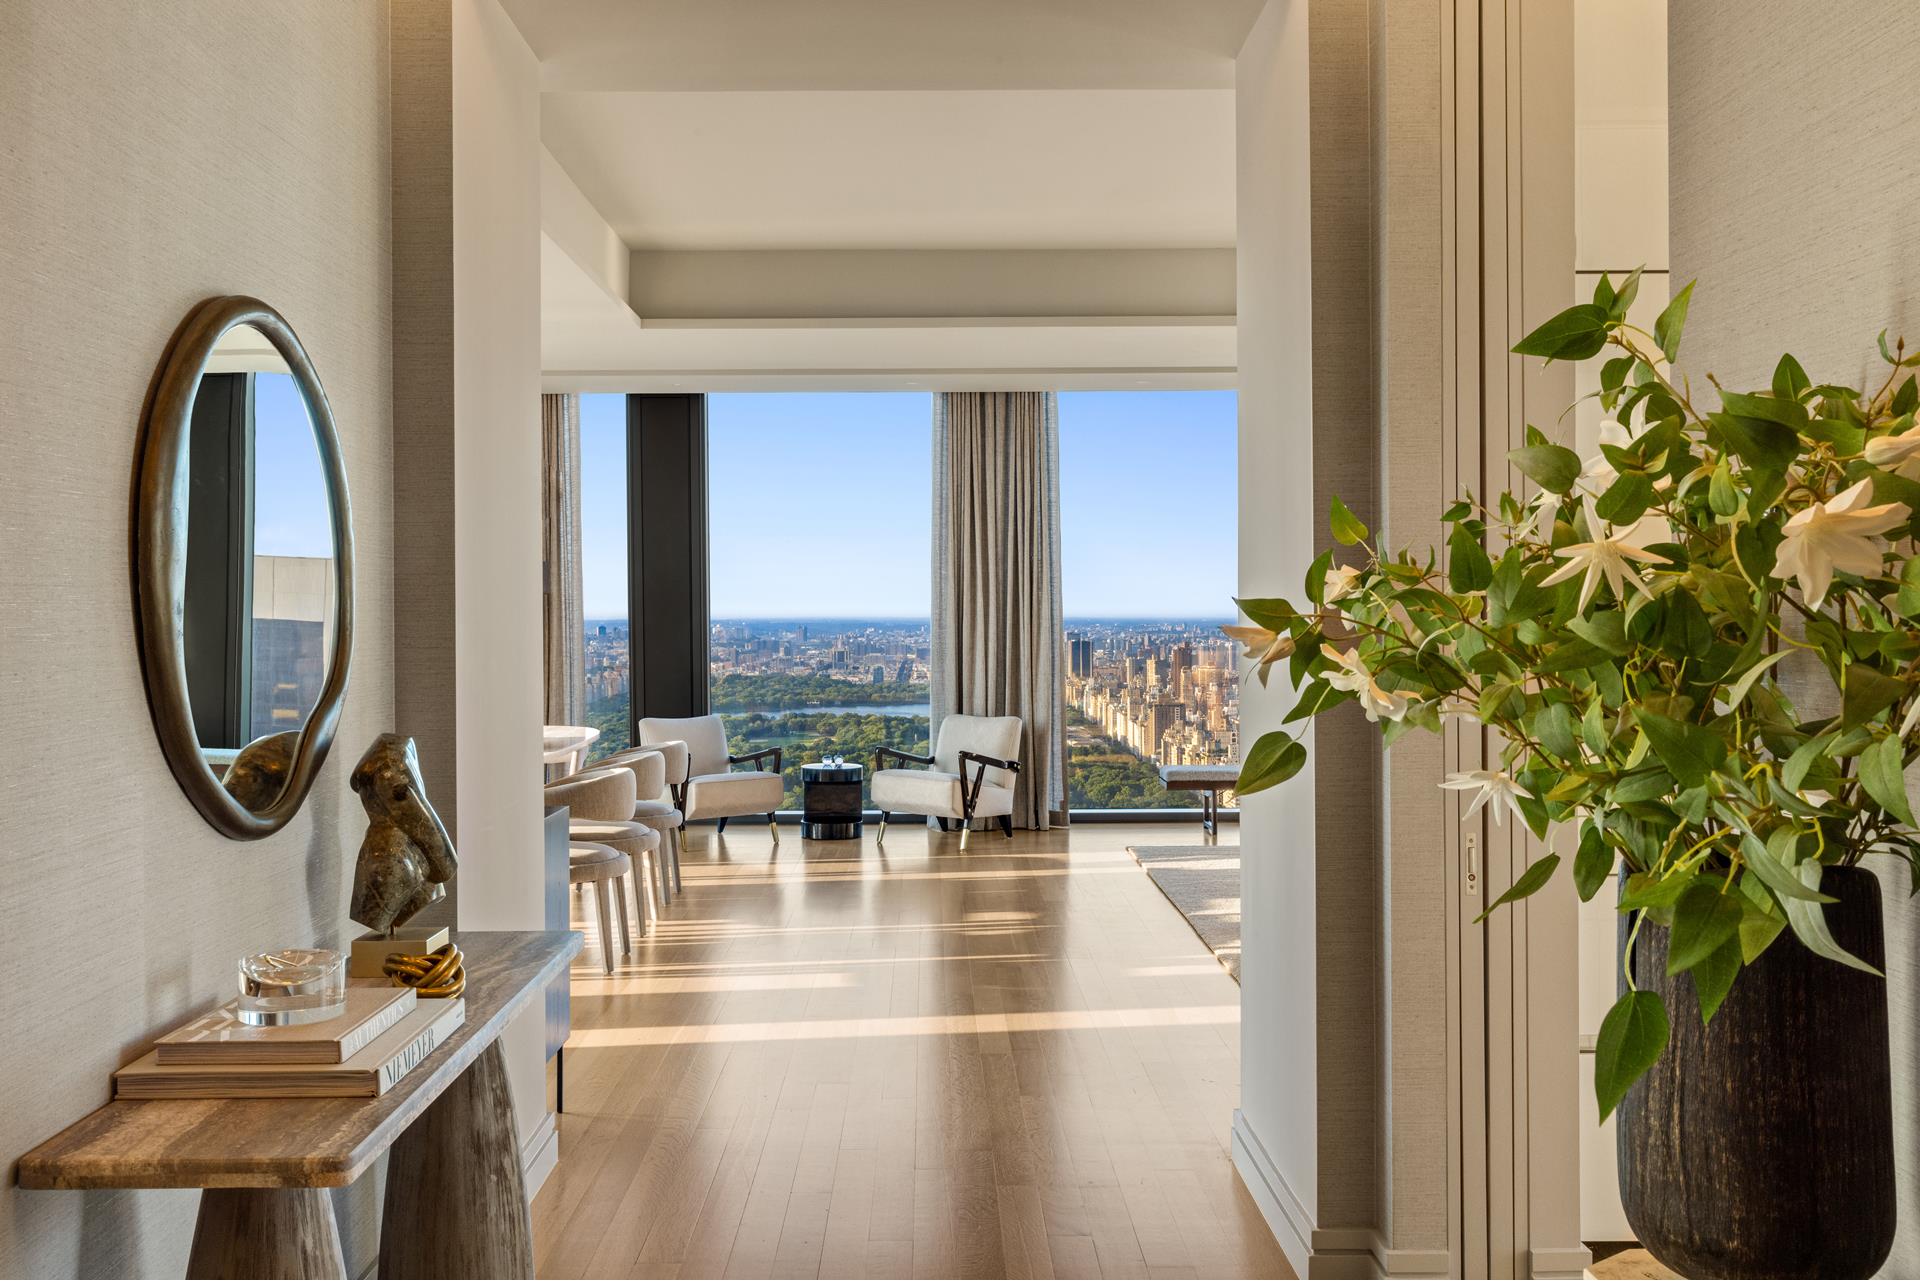 53 West 53rd Street 51A, Chelsea And Clinton, Downtown, NYC - 4 Bedrooms  
4.5 Bathrooms  
5 Rooms - 